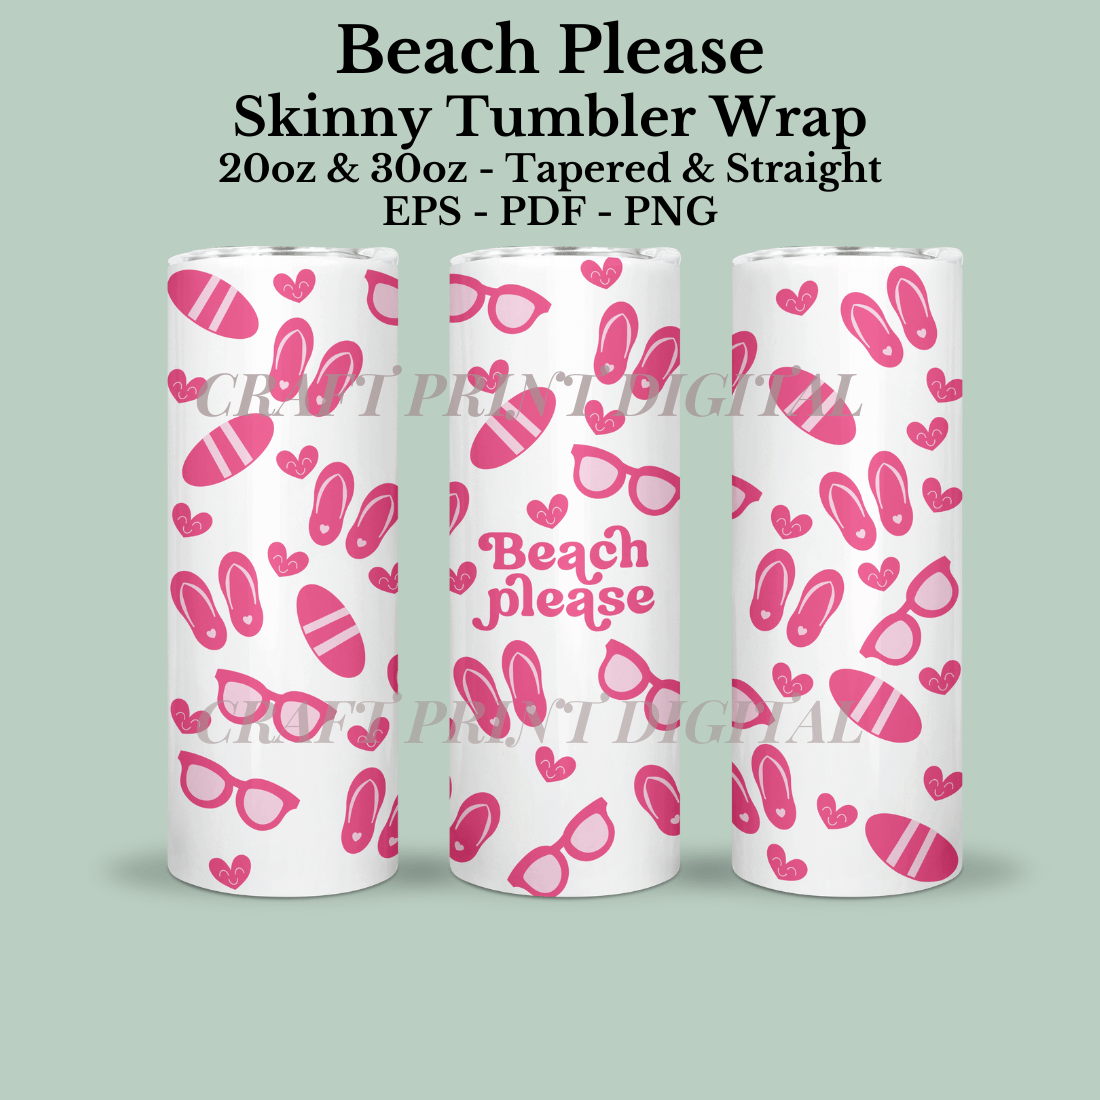 Beach Skinny Tumbler 20oz & 30oz Sublimation Wrap Straight and Tapered PNG, PDF, EPS Instan Download Digital File pinterest preview image.